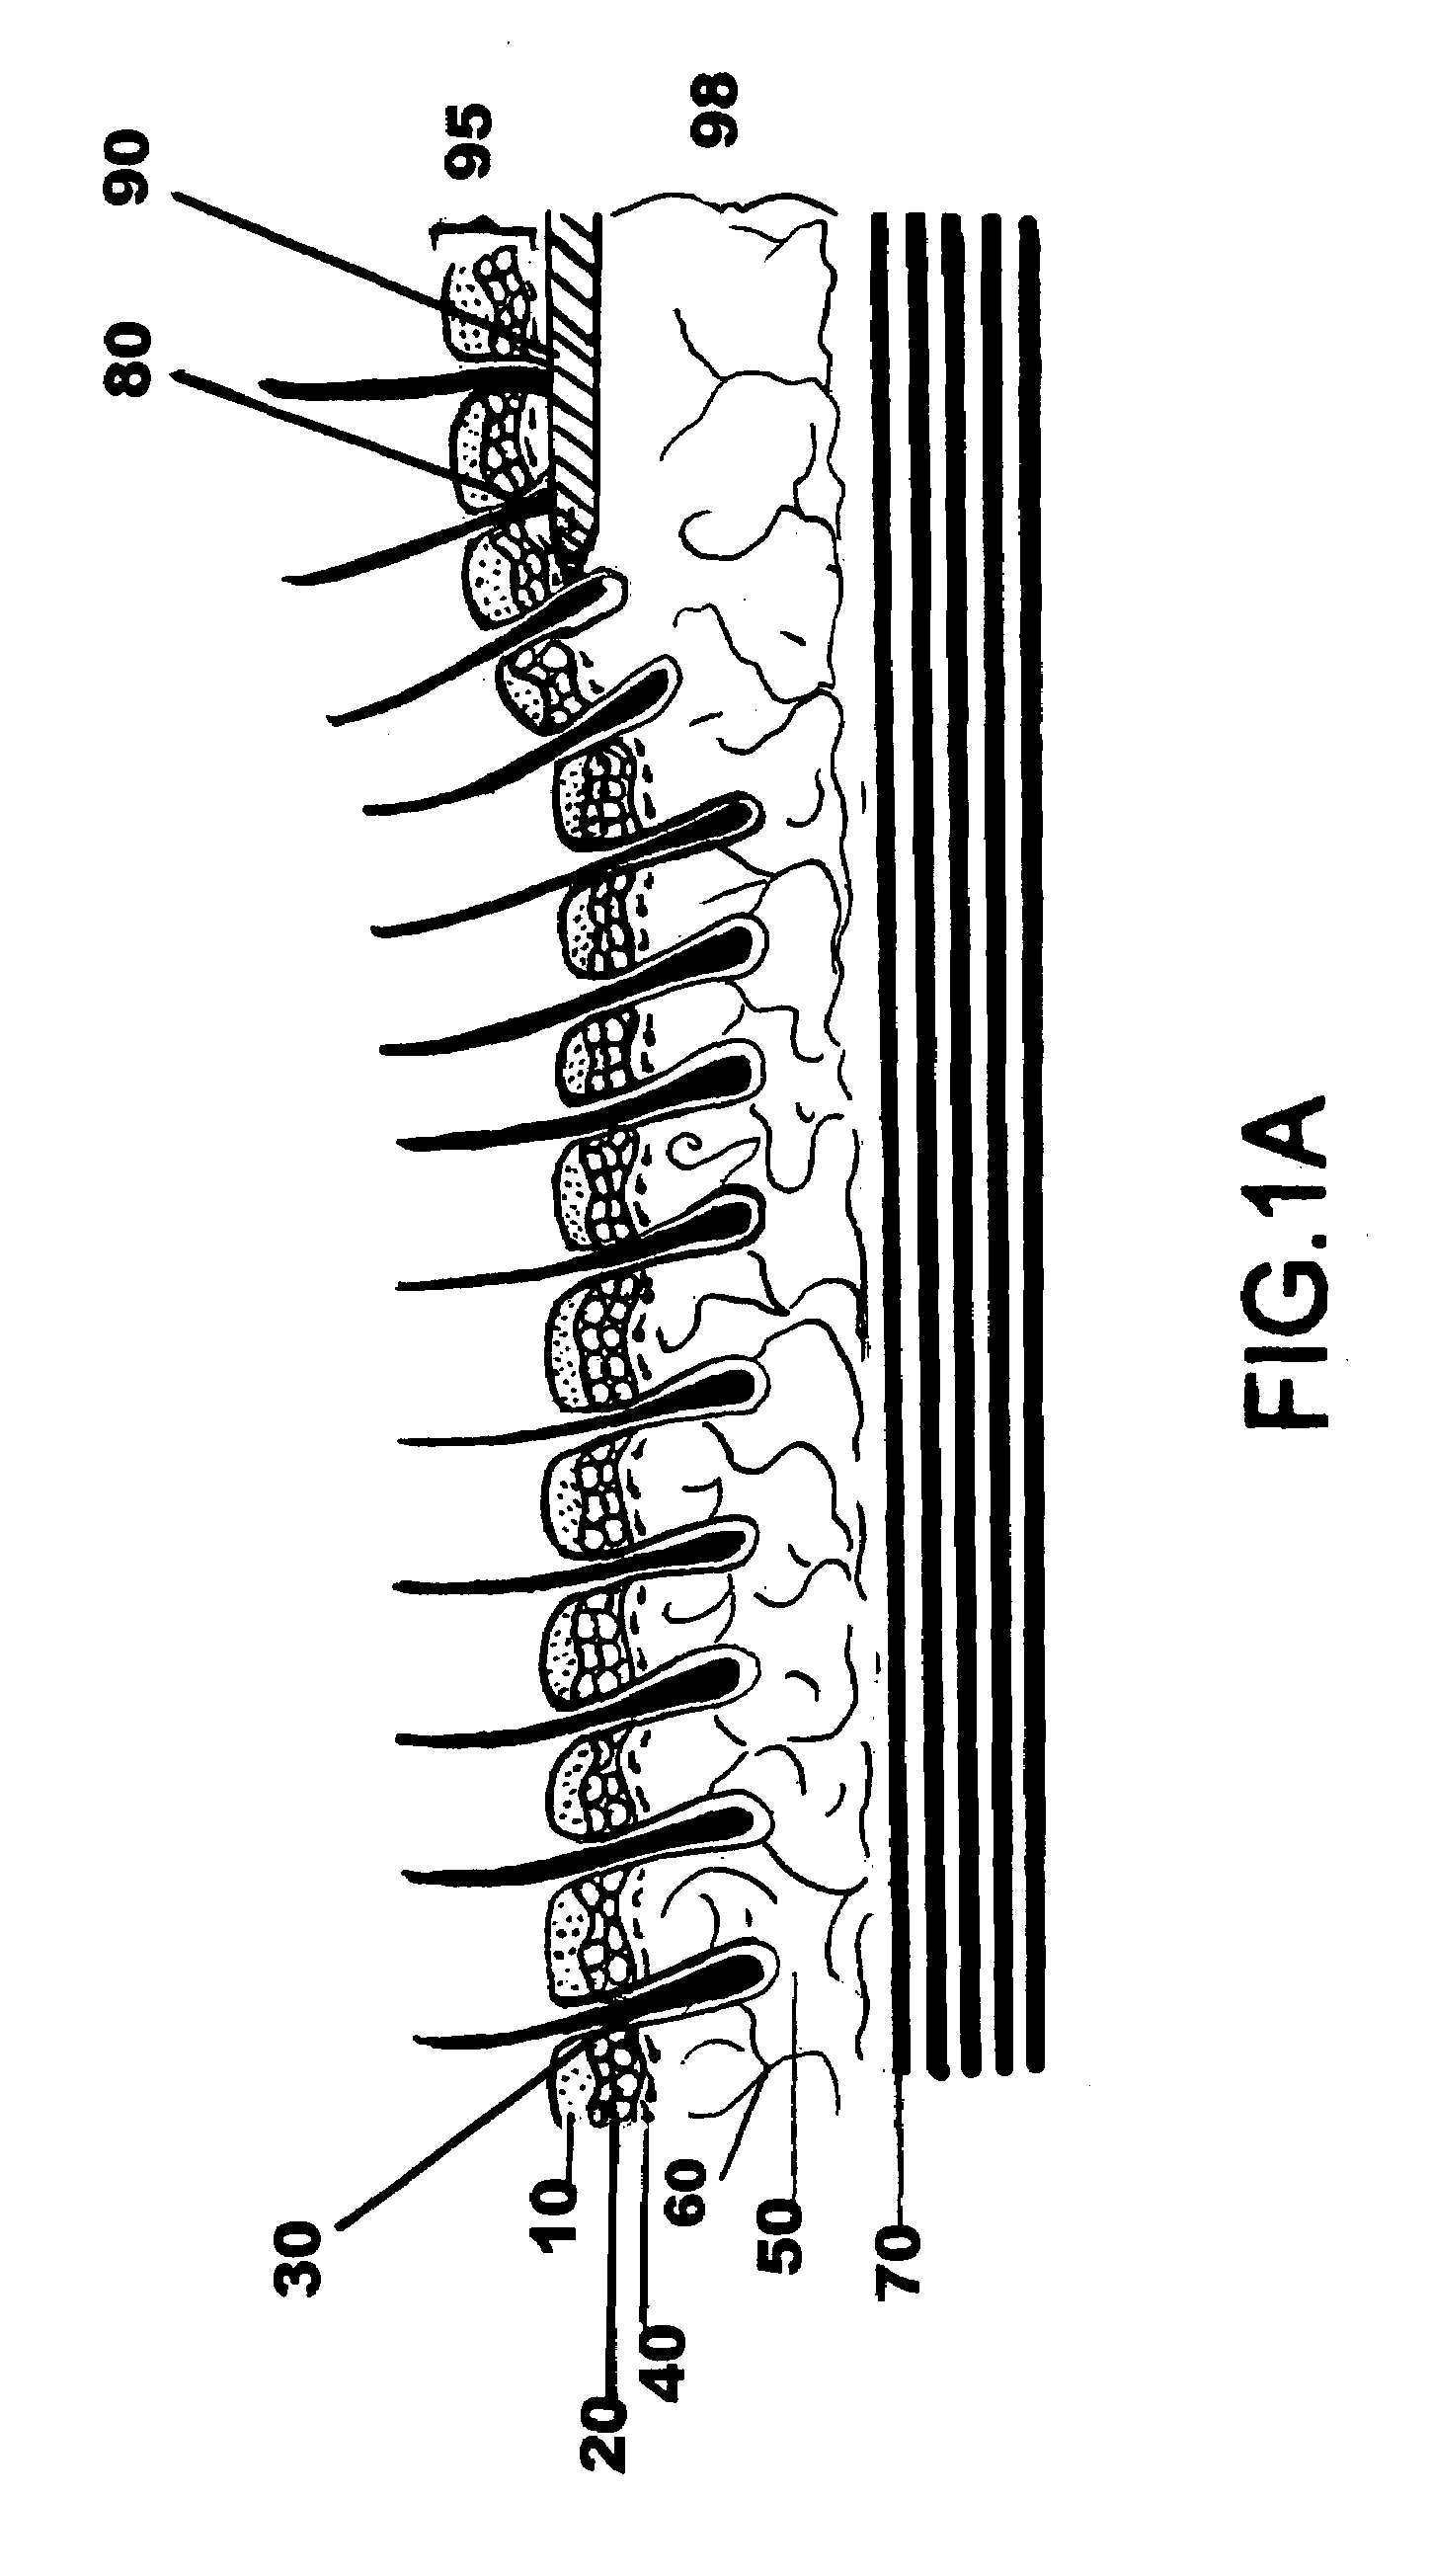 Facial tissue strengthening and tightening device and methods